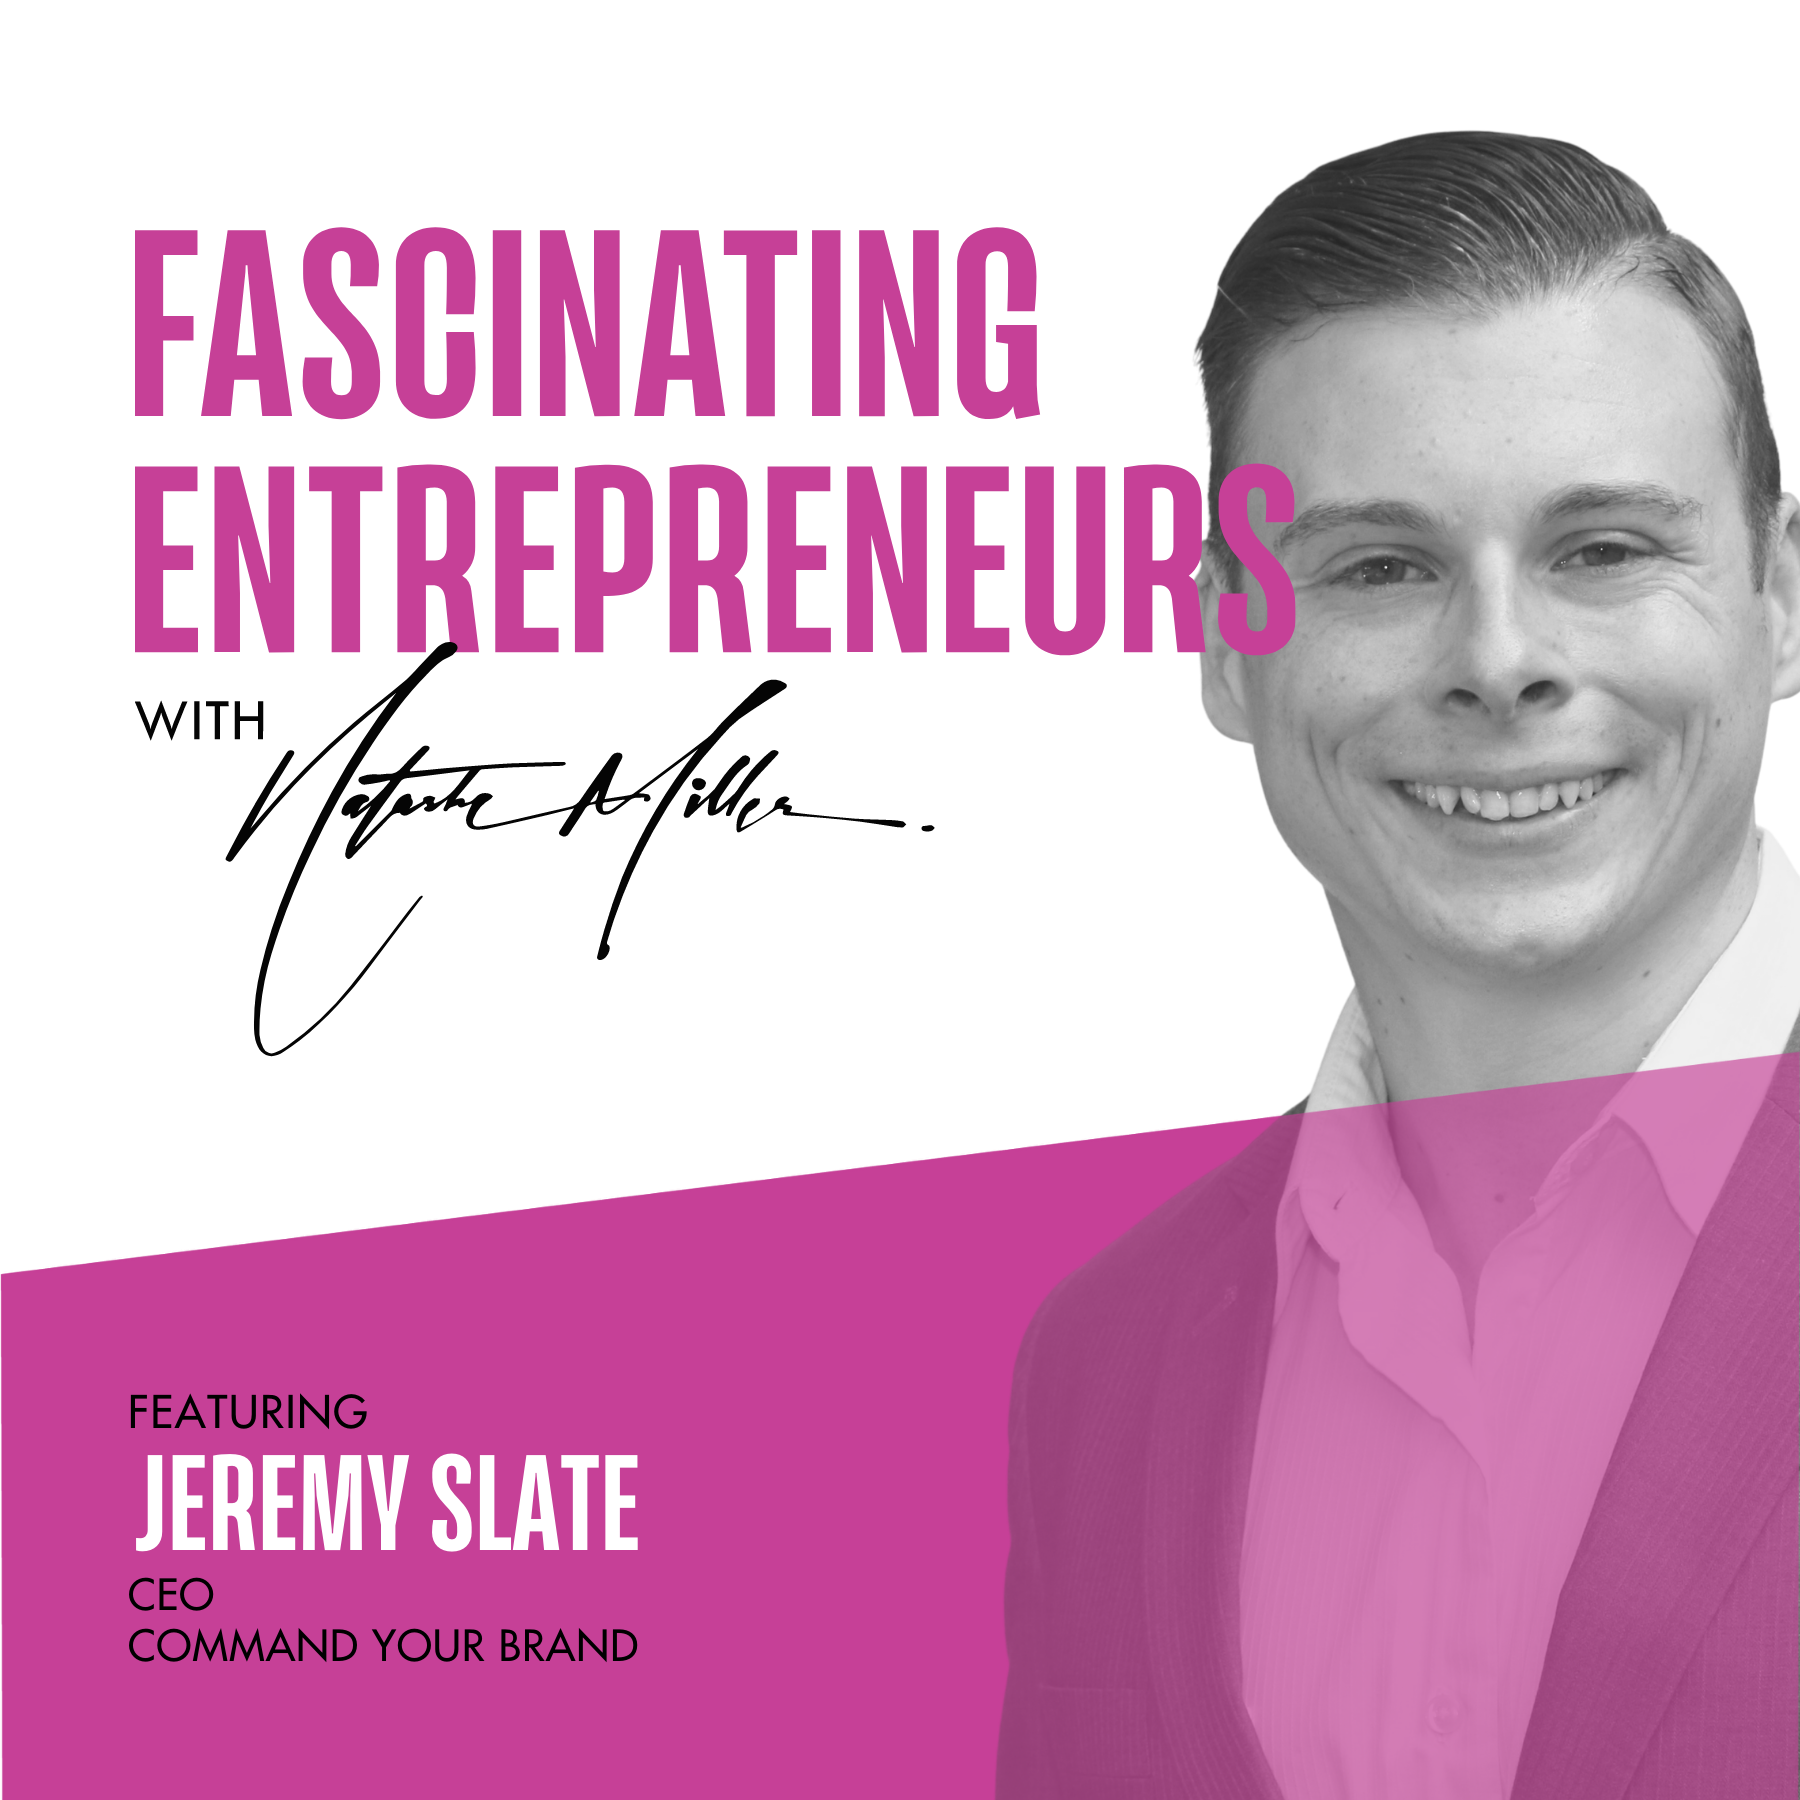 How Jeremy Ryan Slate's Podcast Saw 10,000 listens in His First 30 Days Ep. 62